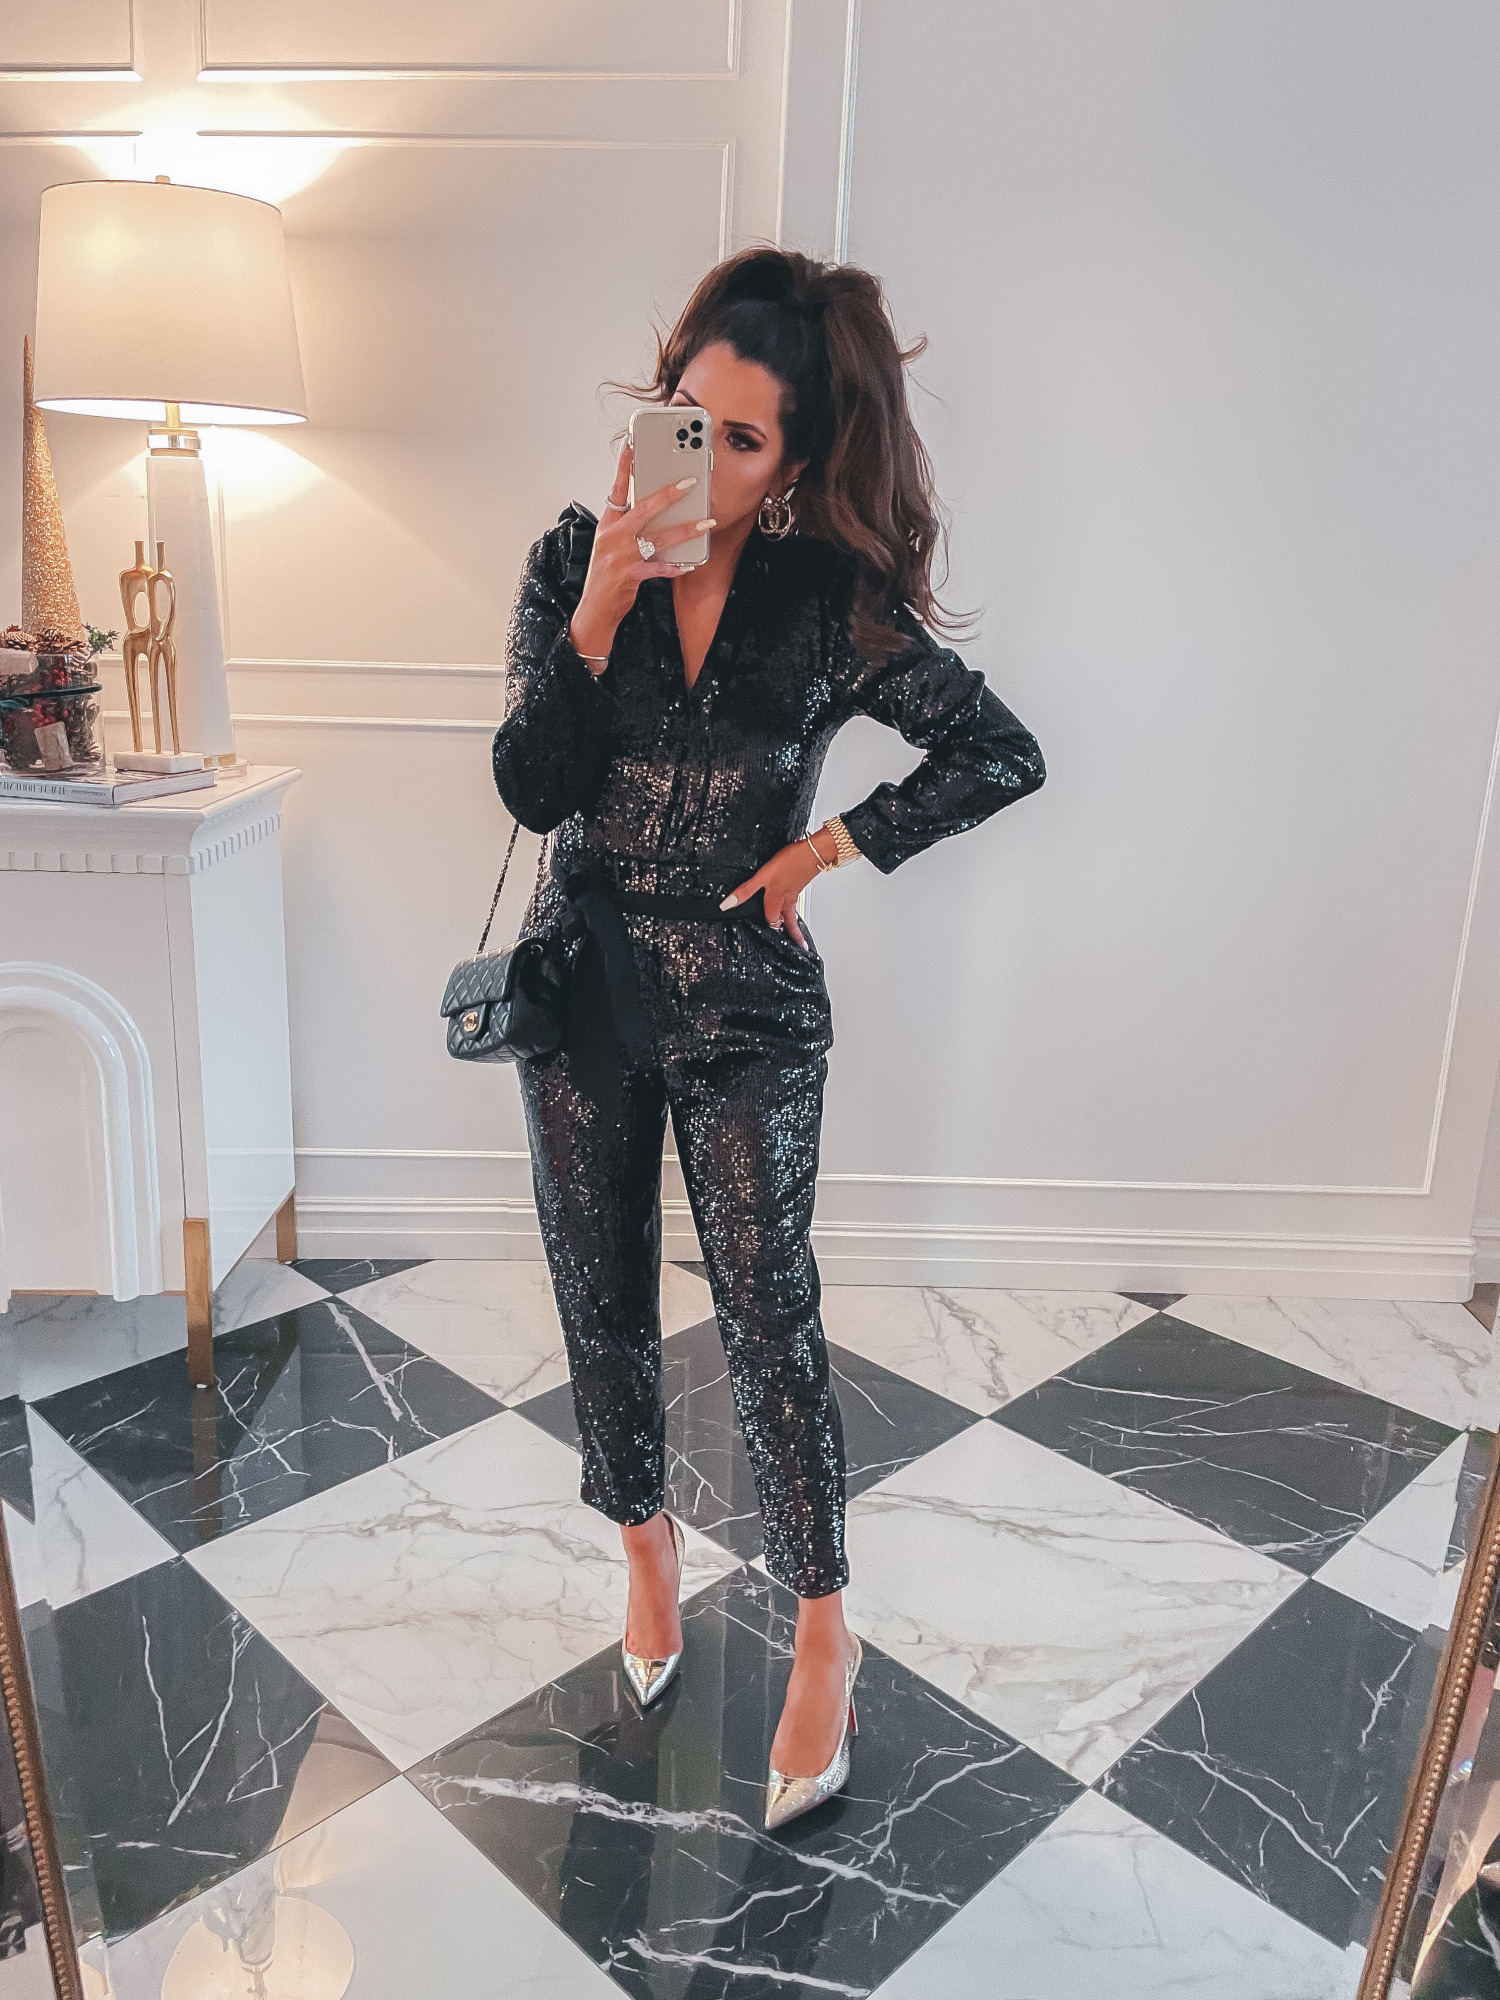 best black friday cyber monday sales 2020, top black friday sales 2020, emily gemma166 |2020 Black Friday Deals by popular US life and style blog, The Sweetest Thing: image of Emily Gemma wearing a black sequin jumpsuit and silver stiletto heels. 